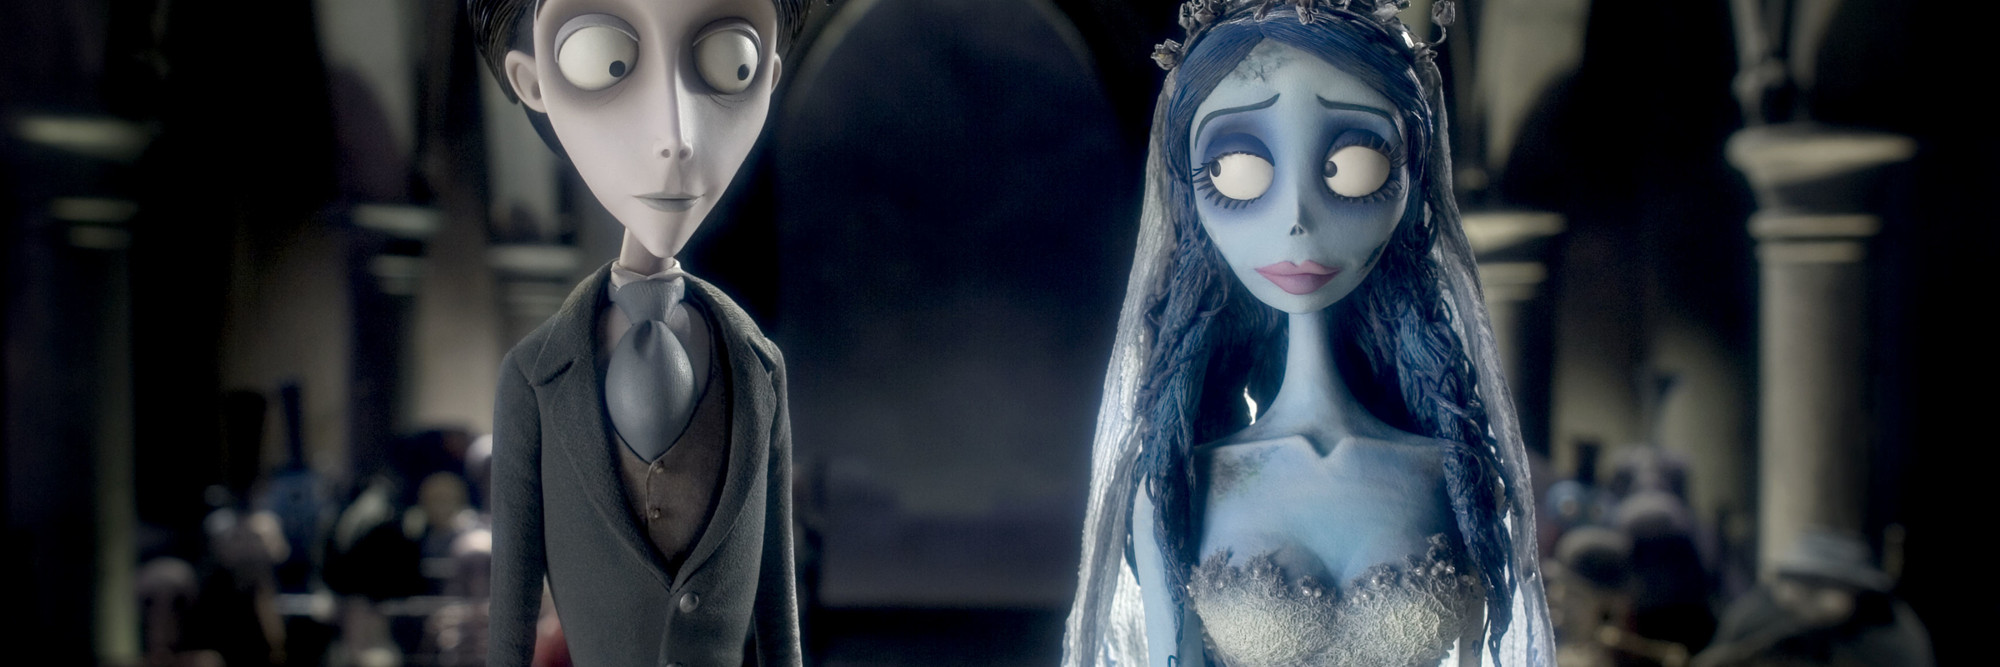 Corpse Bride. 2005. USA/Great Britain. Directed by Tim Burton, Mike Johnson